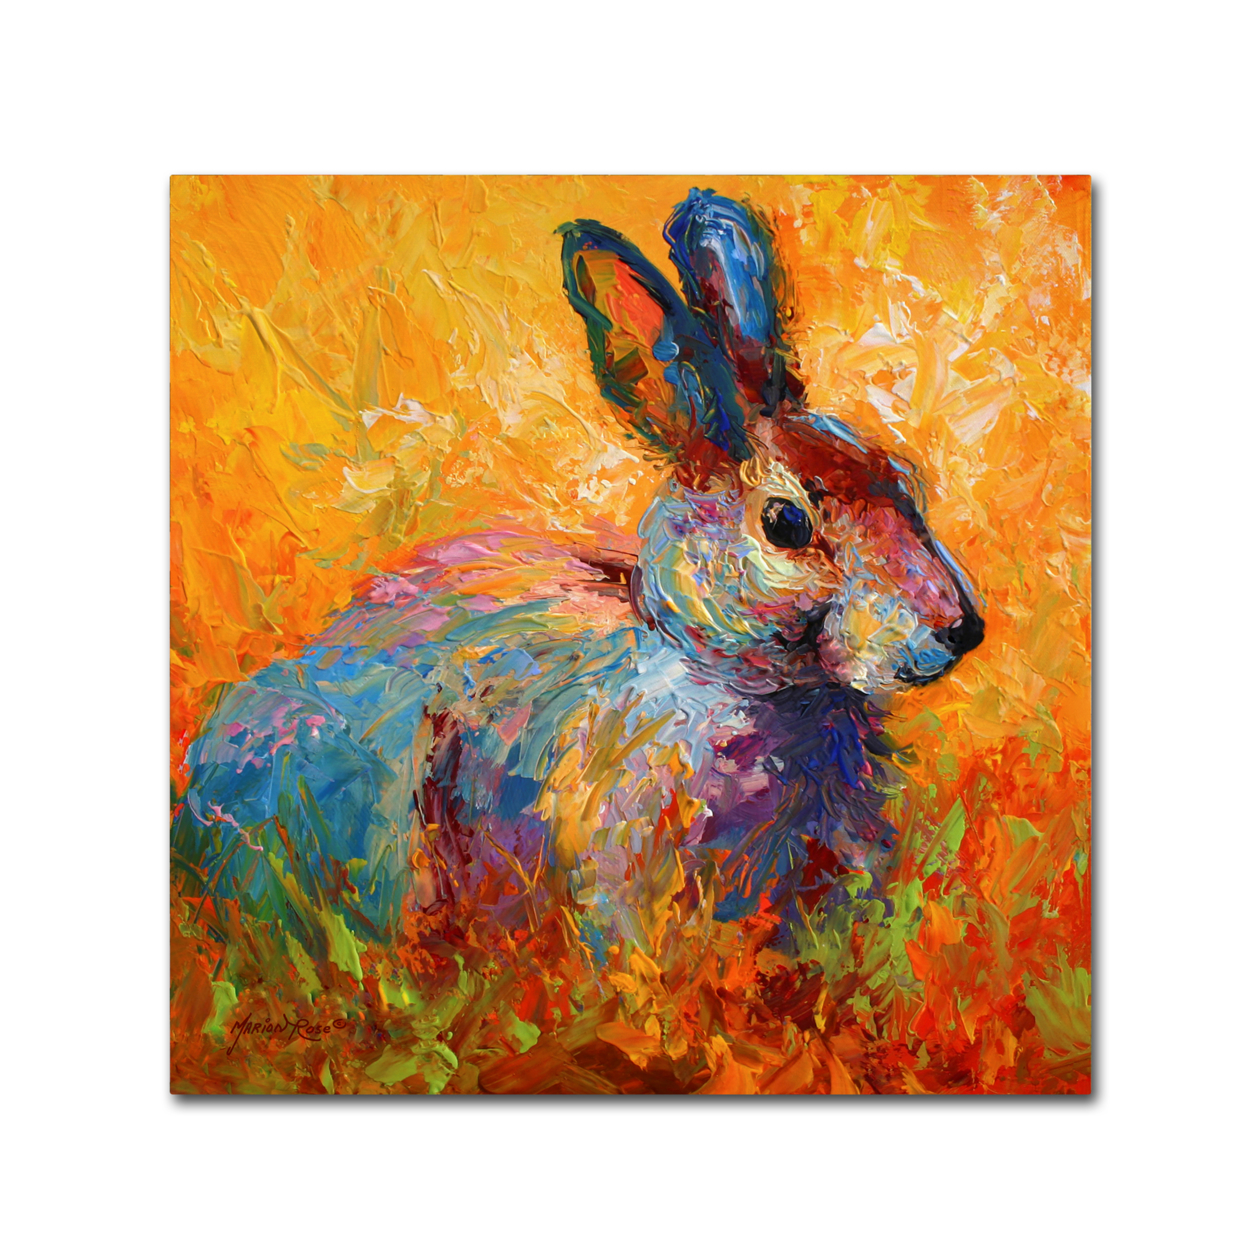 Marion Rose 'Bunny IV' Ready To Hang Canvas Art 24 X 24 Inches Made In USA